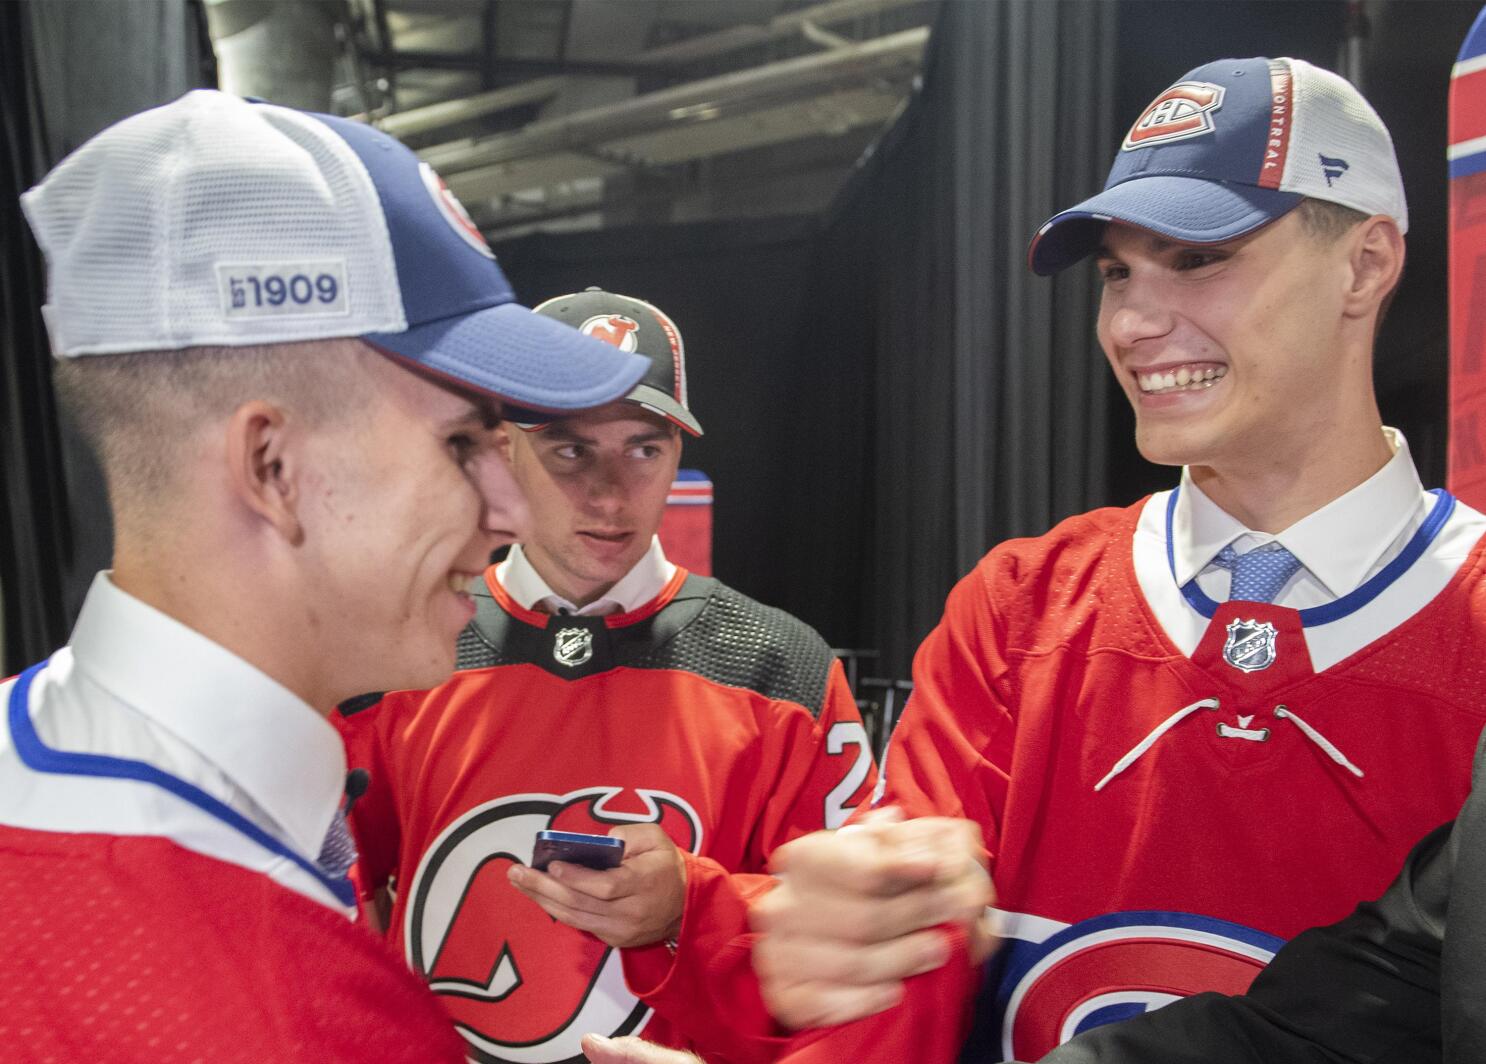 Canadiens select Slafkovsky with the No. 1 pick at the NHL draft